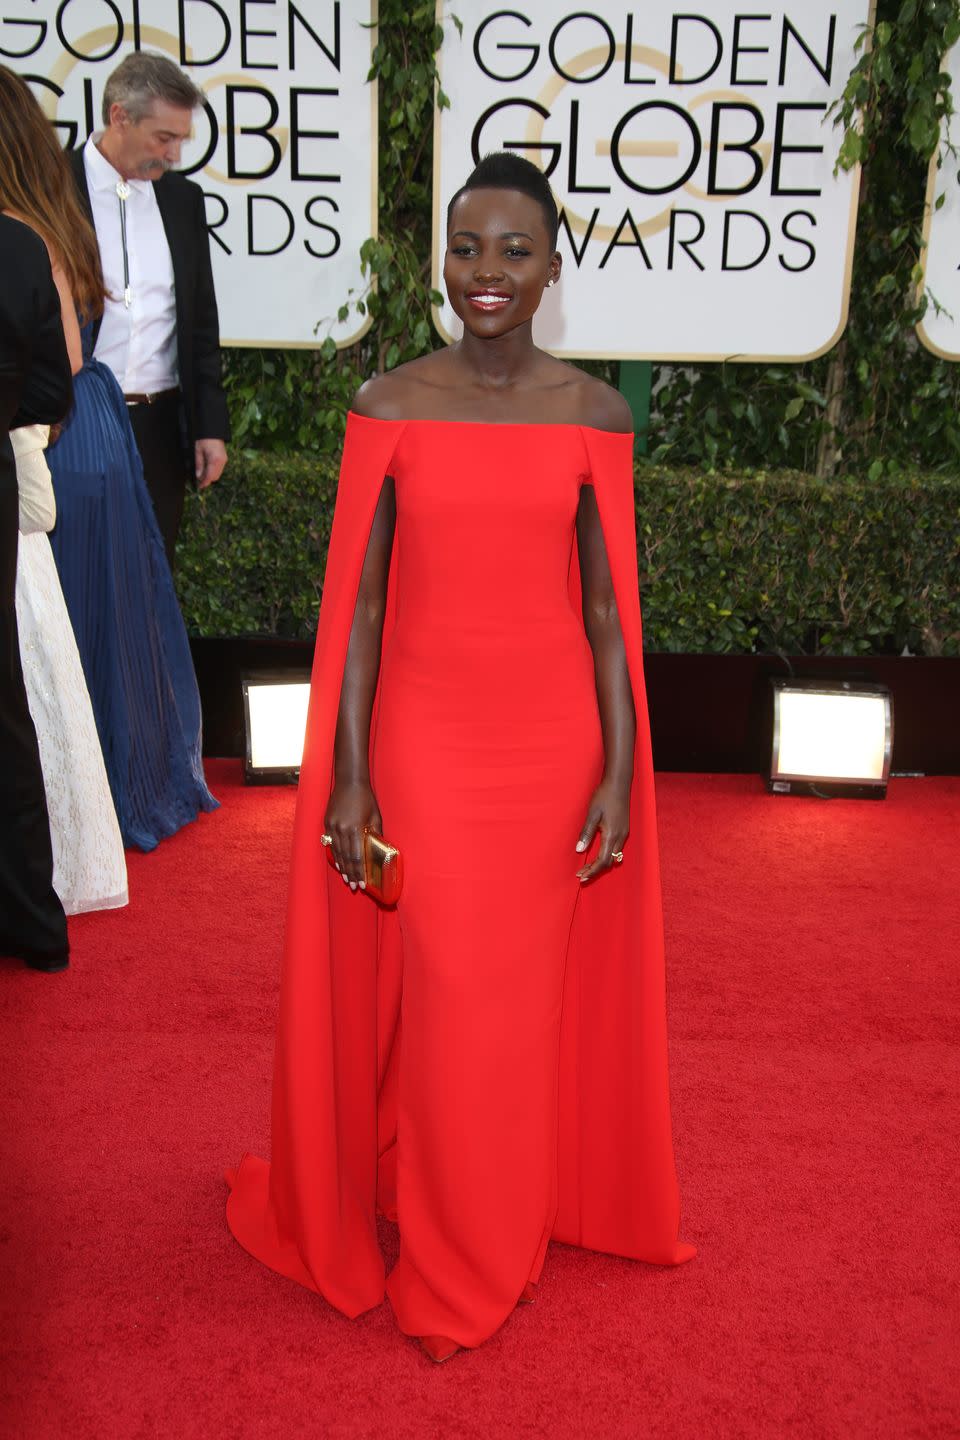 lupita nyongo attends the 71st annual golden globe awards aka golden globes at hotel beverly hilton in los angeles, usa, on 12 january 2014 photo hubert boesl usage worldwide photo by hubert boeslpicture alliance via getty images